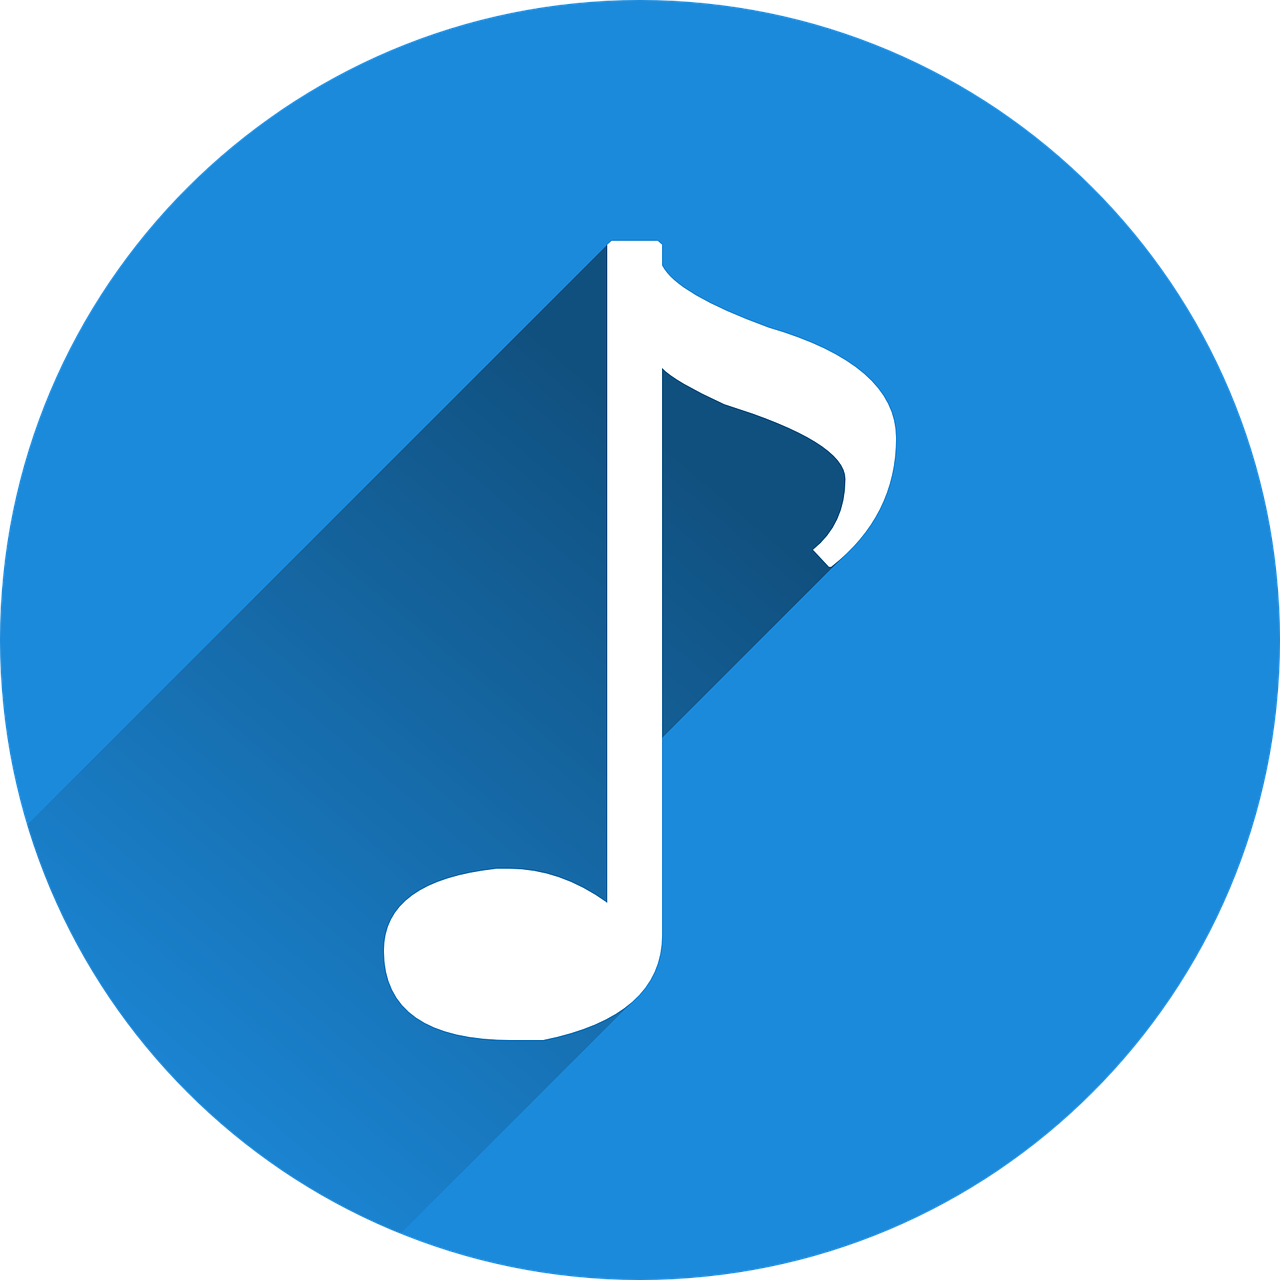 a white musical note on a blue circle, an album cover, by Joe Sorren, pixabay, tachisme, game icon asset, avatar image, flat icon, -n9